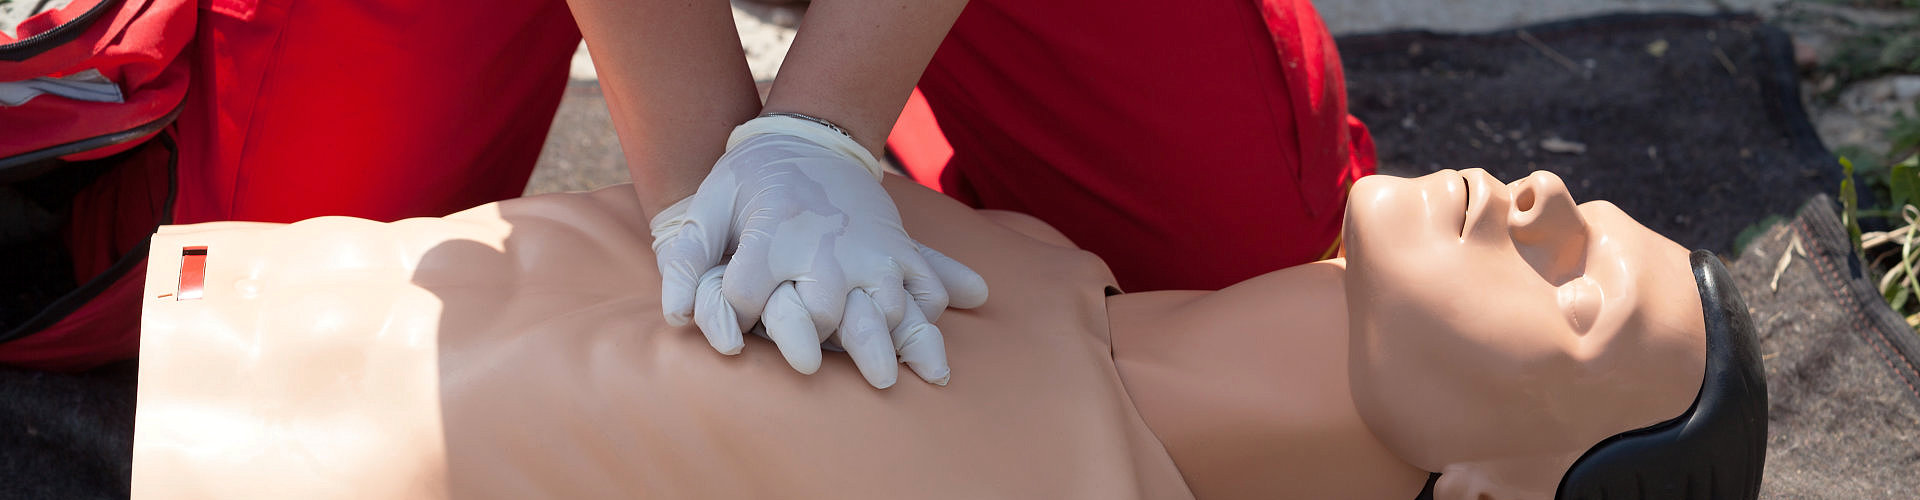 CPR being performed on a medical-training